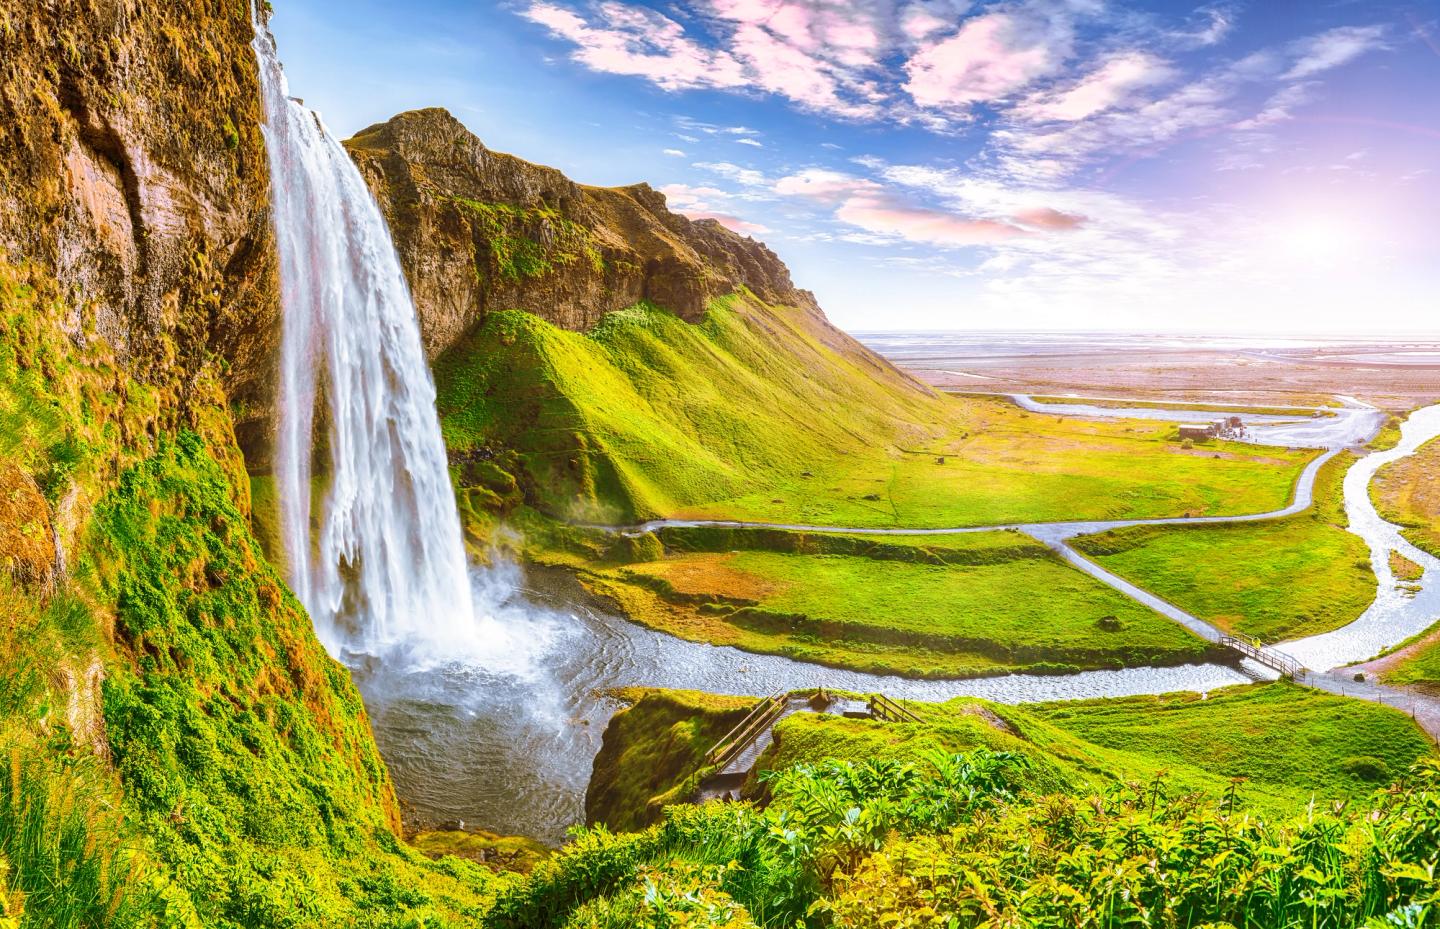 Seljalandsfoss waterfall in Iceland during sunny day.